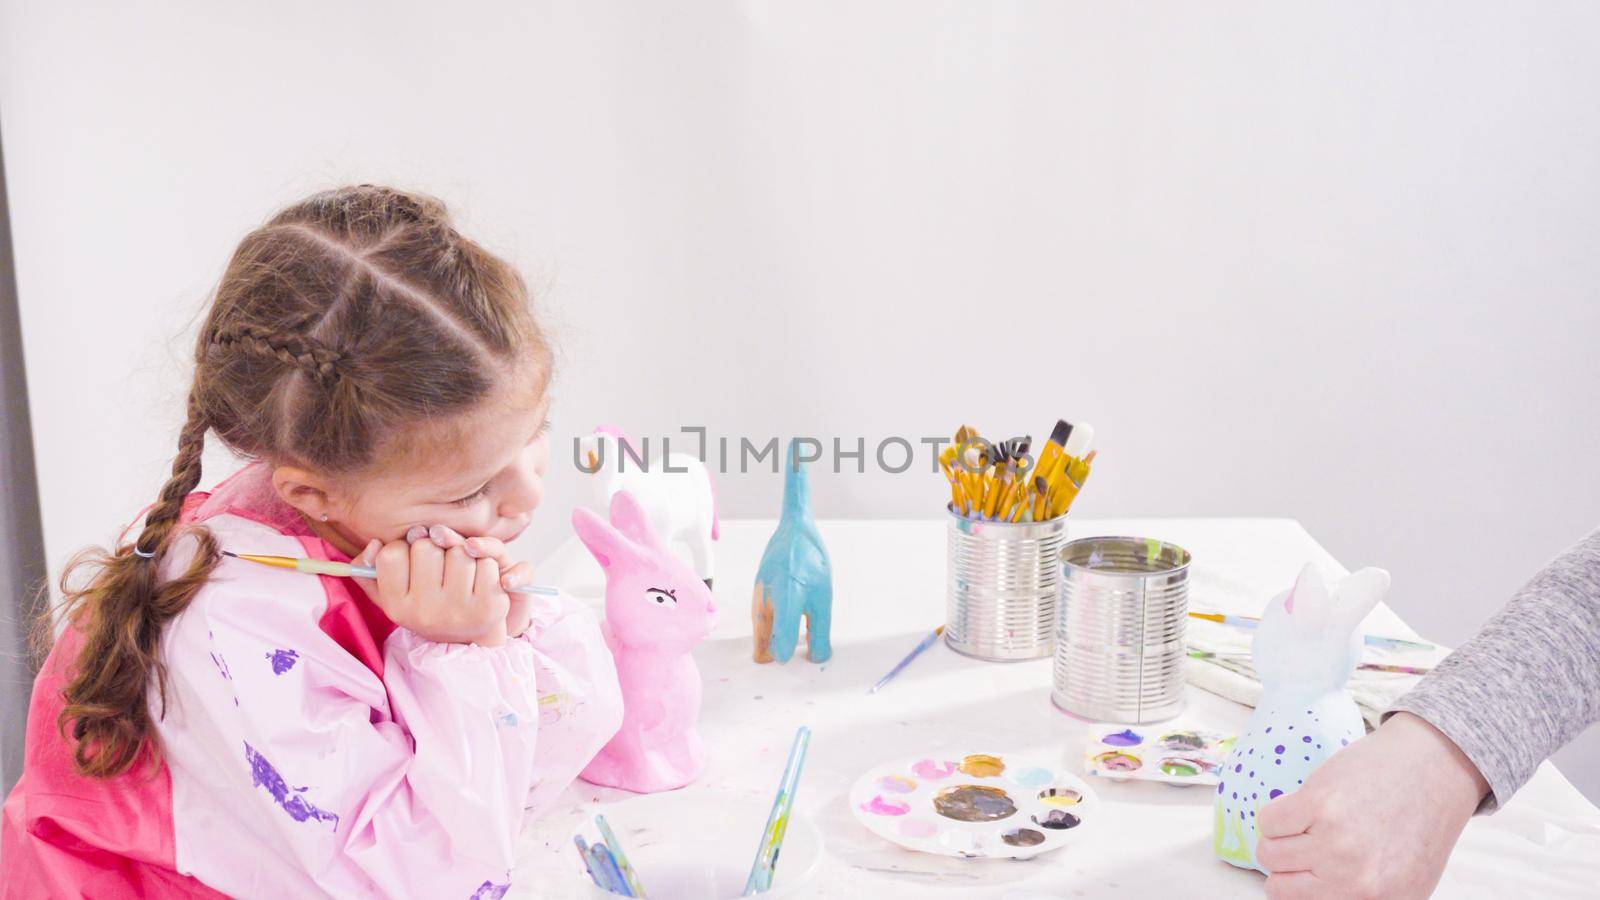 Little girl painting paper mache figurines with acrylic paint for her homeschooling art project.